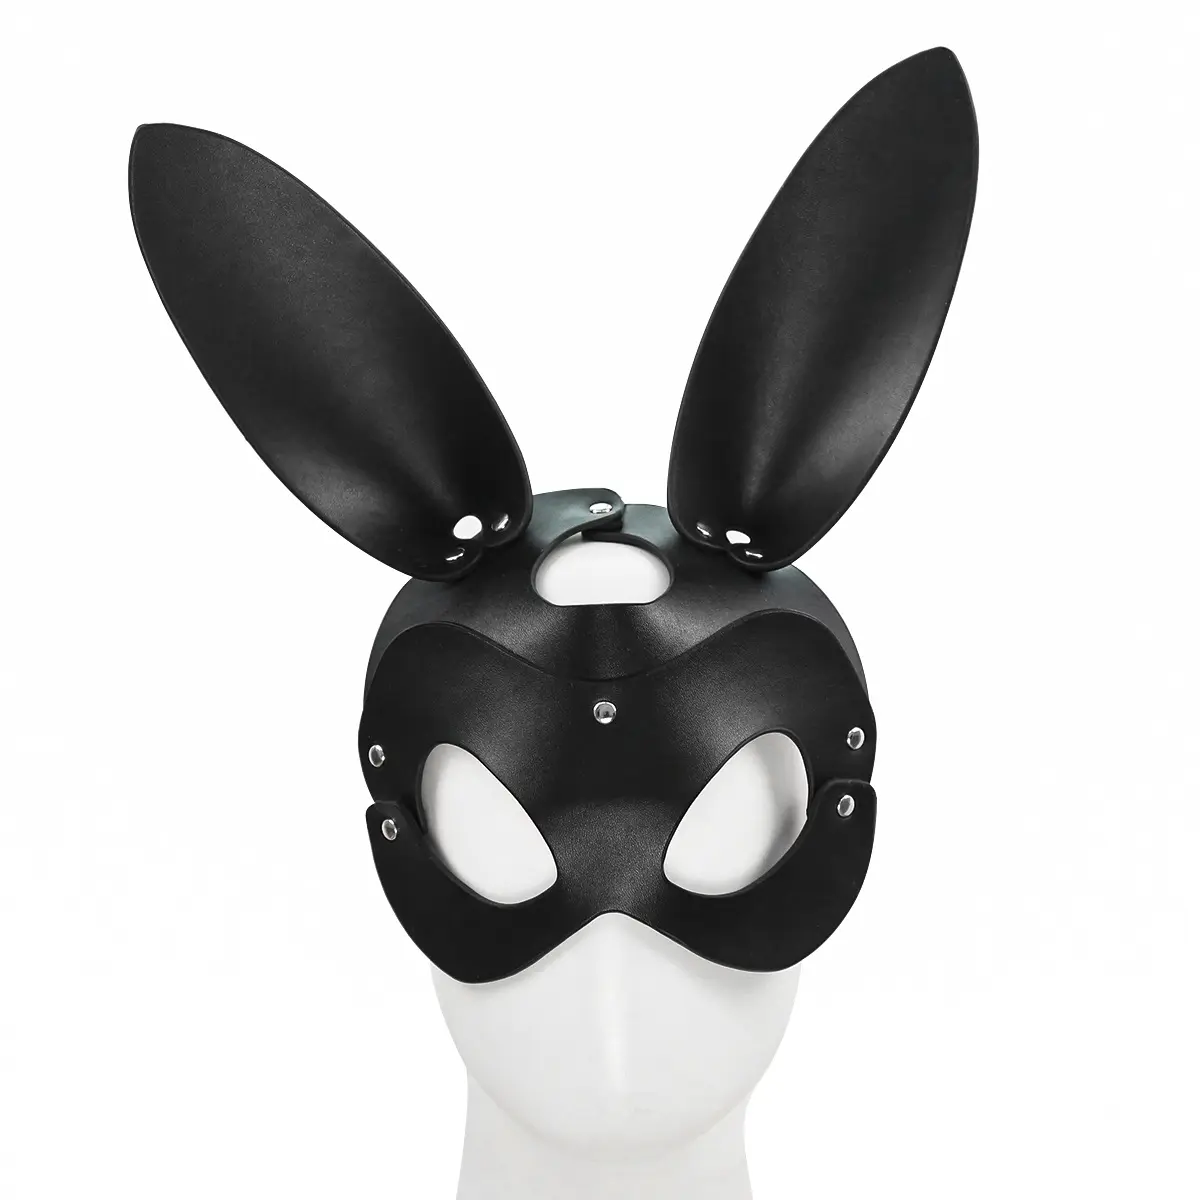 Adult Sex Toys SM Product Night Club Halloween Cosplay Game Party Cat Rabbit Bunny Leather Adjustable Bondage Blindfold Mask